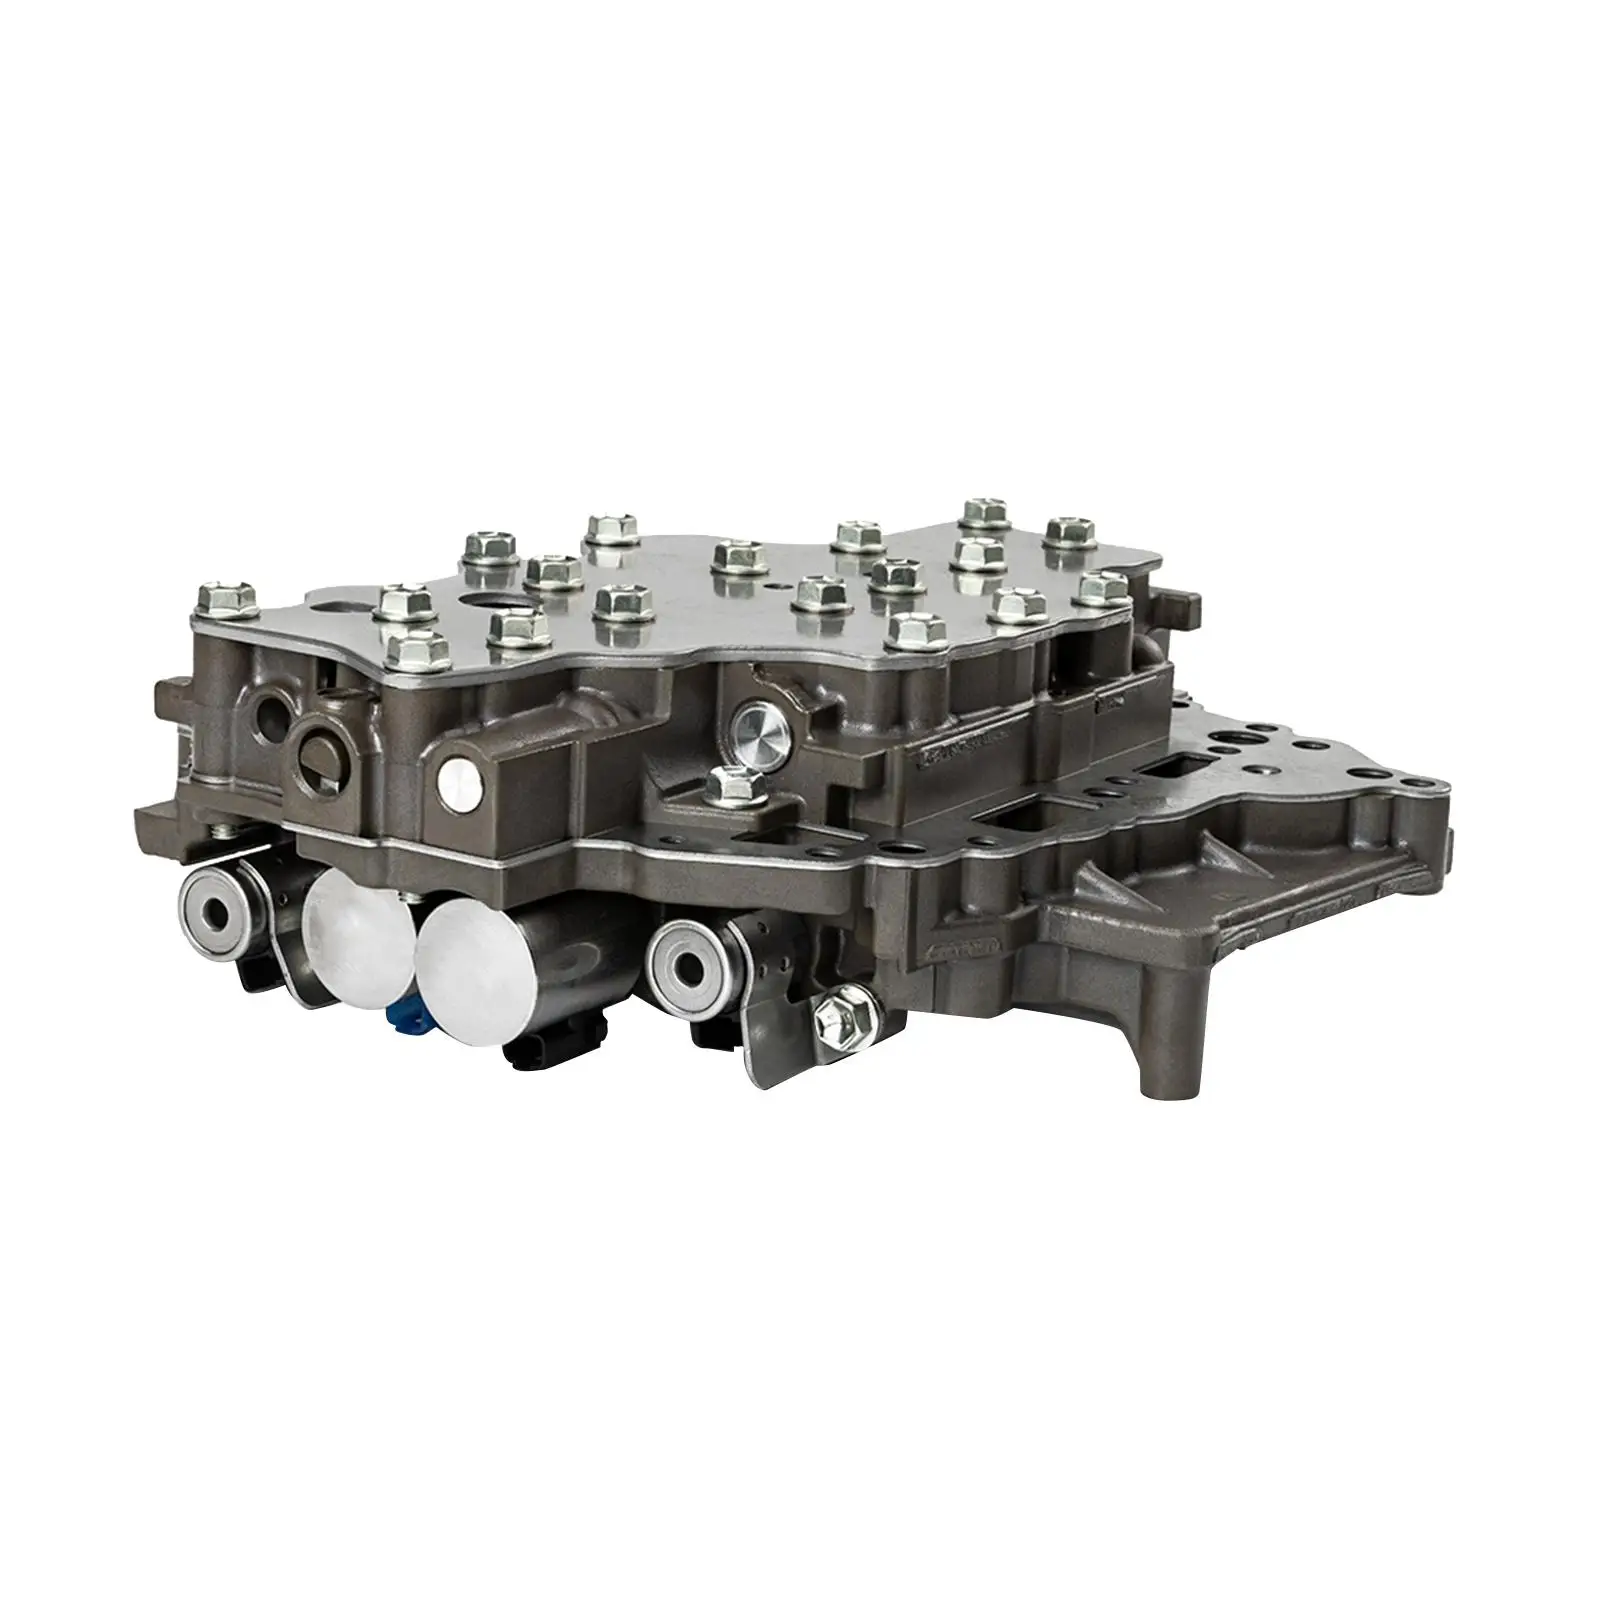 Gearbox Transmission Valve Body embly Accessories K313 K310 for  Corolla1.6L 1.8 - £513.47 GBP